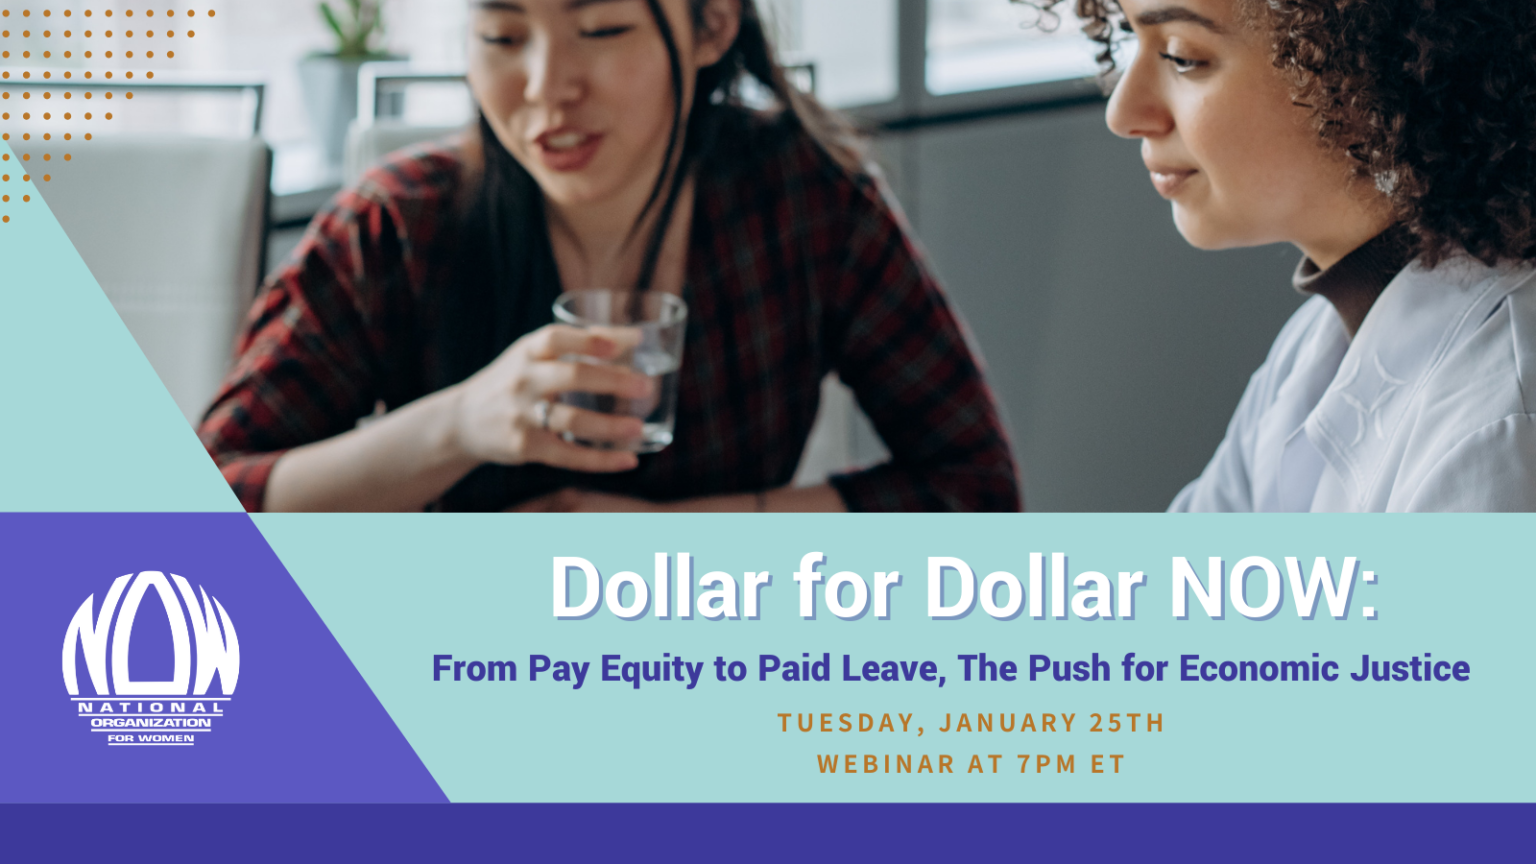 Dollar for Dollar NOW: From Pay Equity to Paid Leave, The Push for Economic Justice